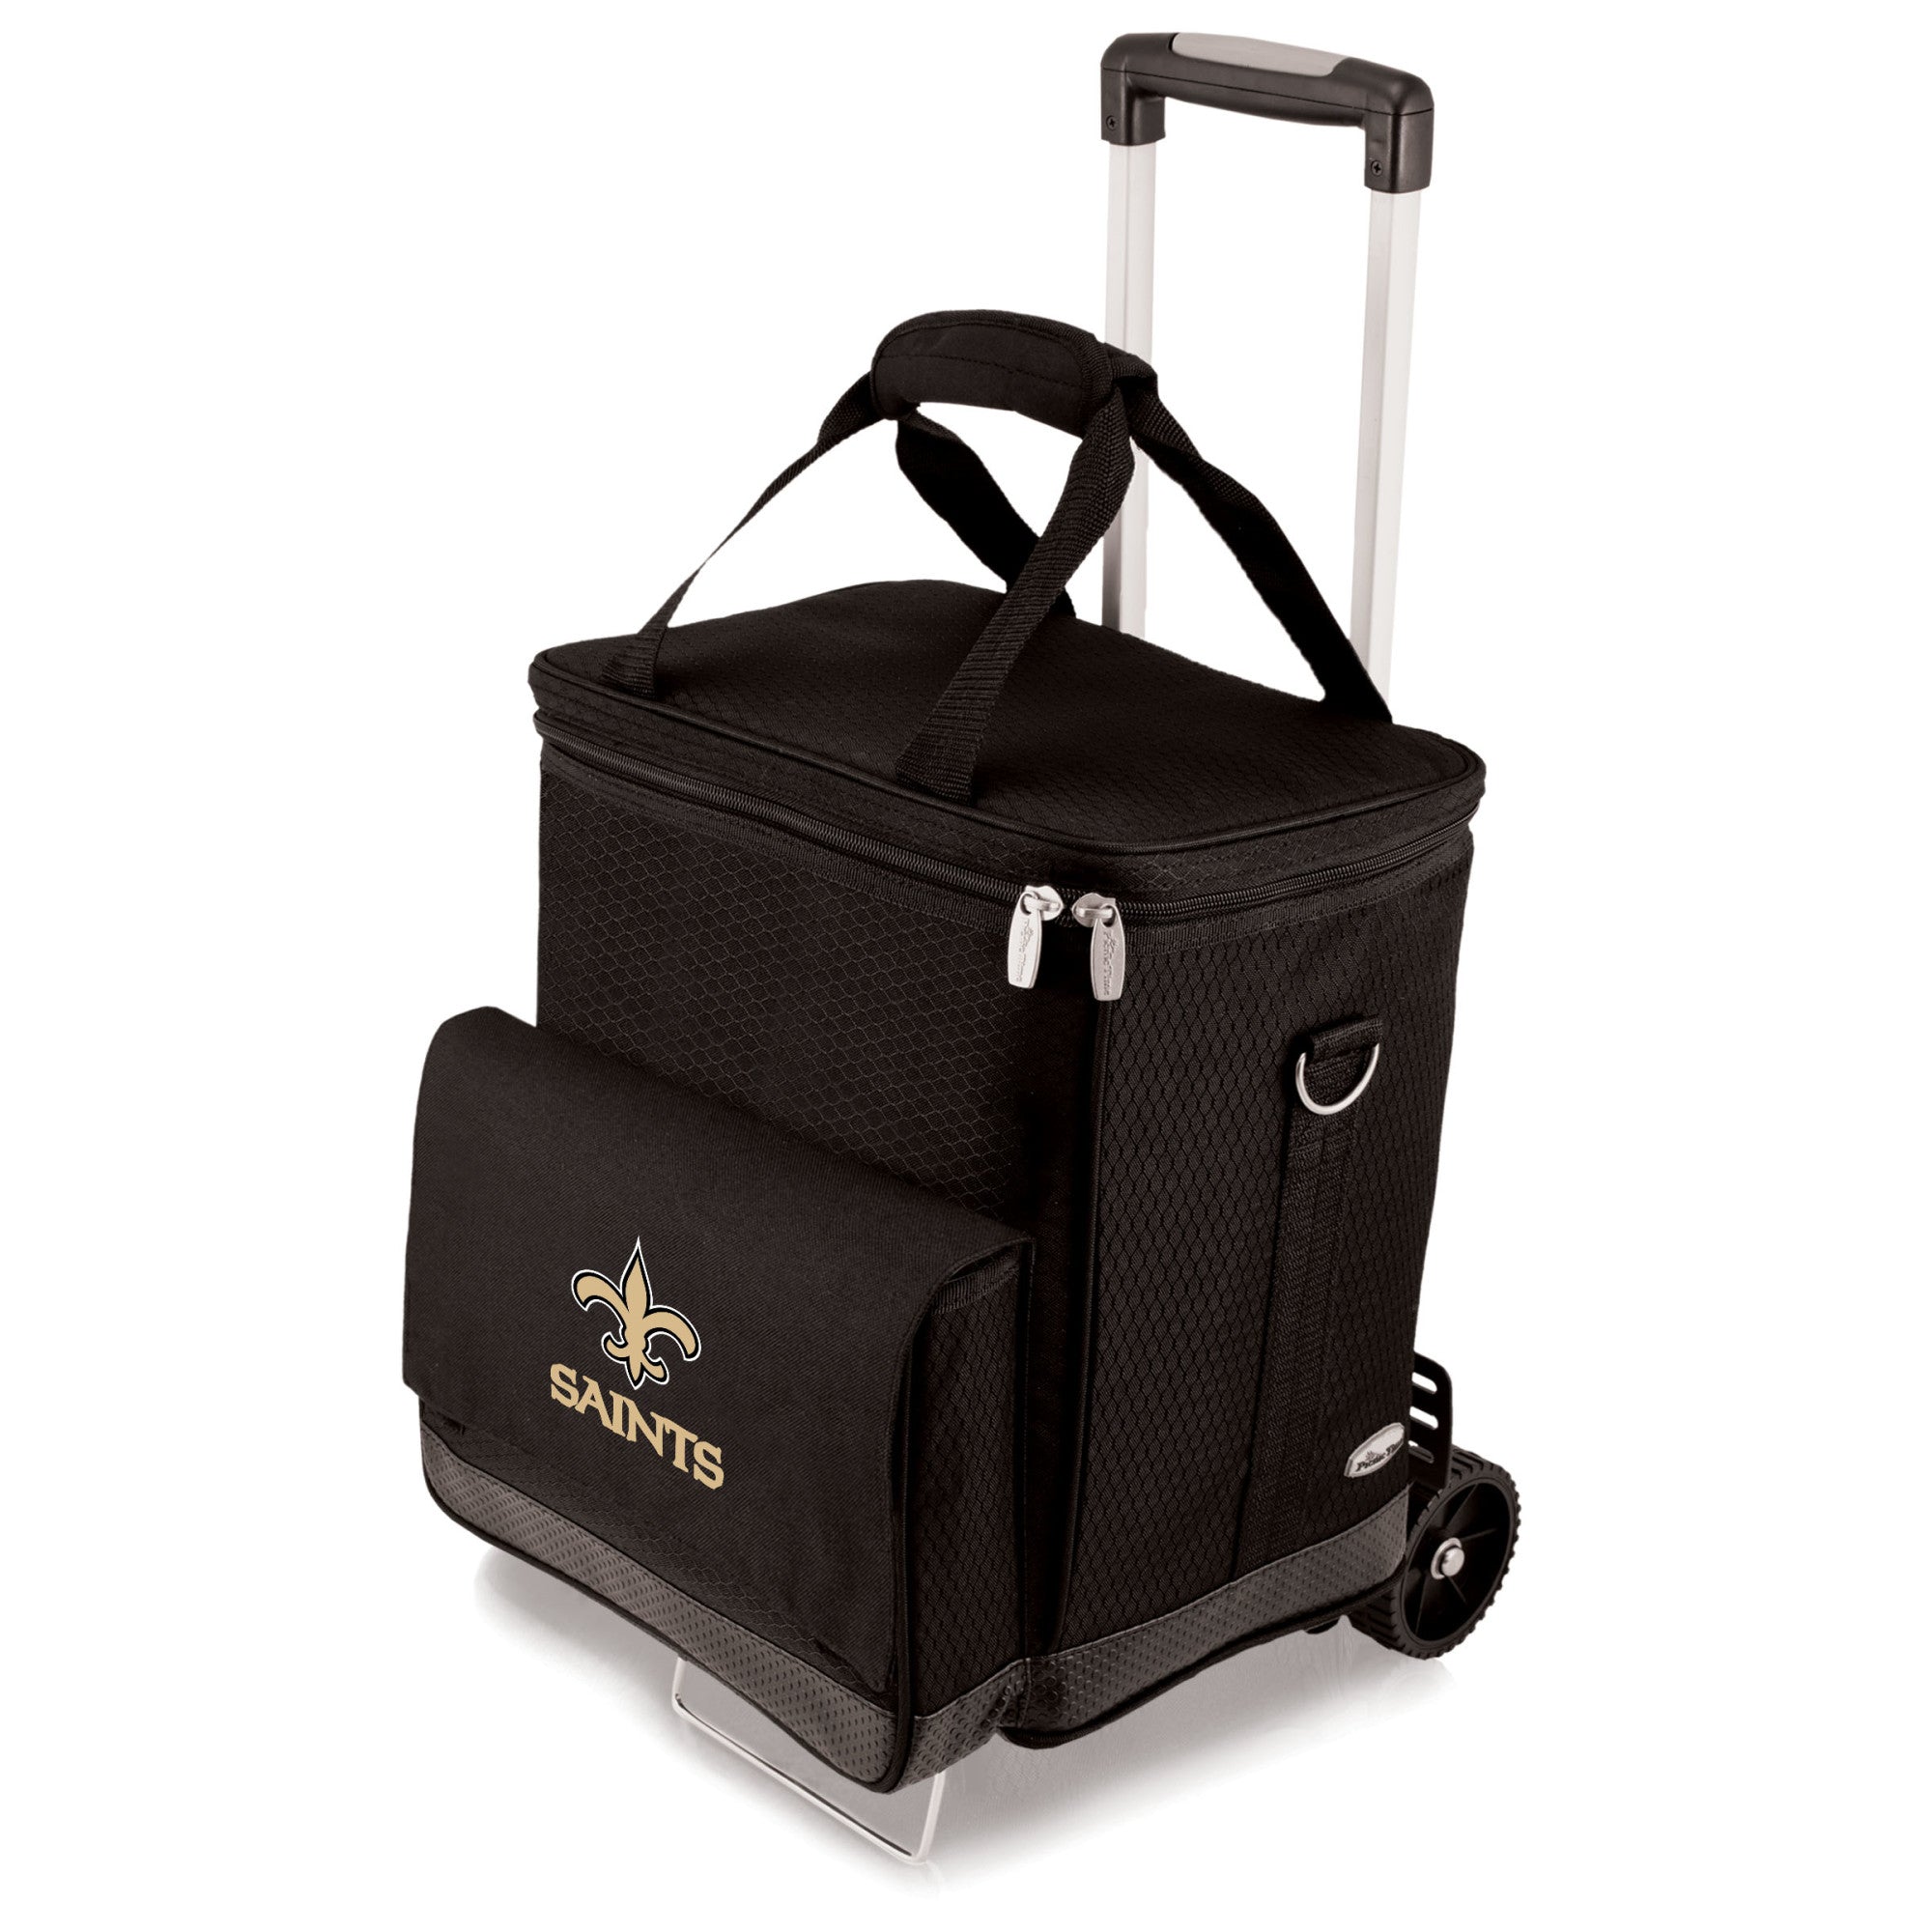 New Orleans Saints - Cellar 6-Bottle Wine Carrier & Cooler Tote with Trolley, (Black with Gray Accents)